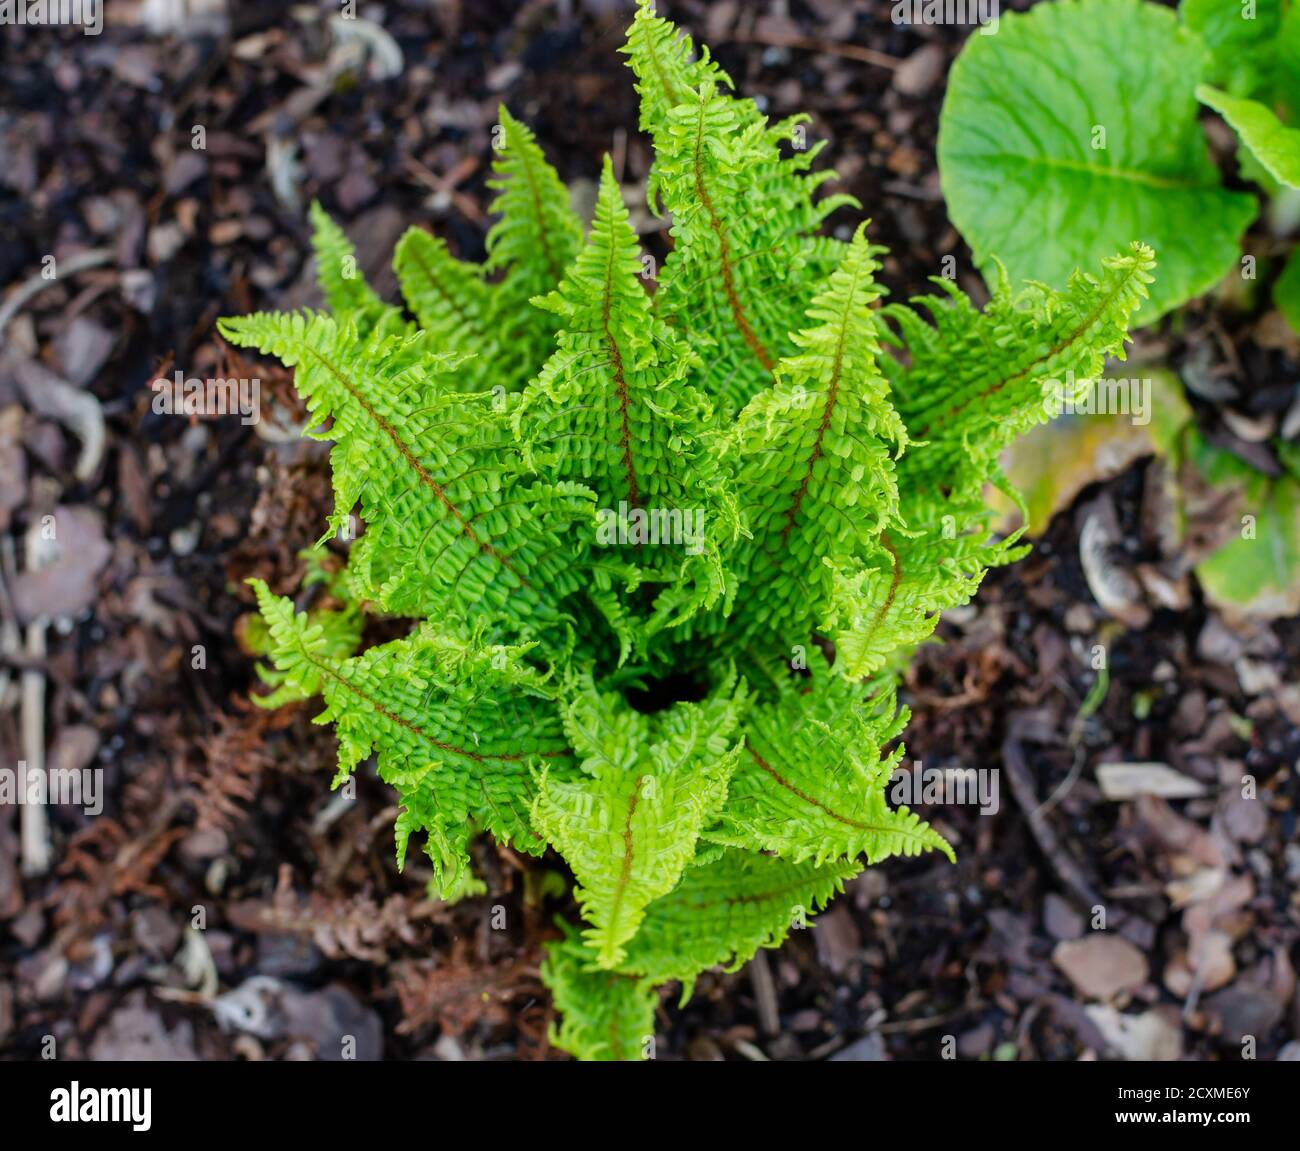 Scaly Male Fern - Dryopteris affinis 'Crispa Congesta'. Top view. Selective focus. Stock Photo